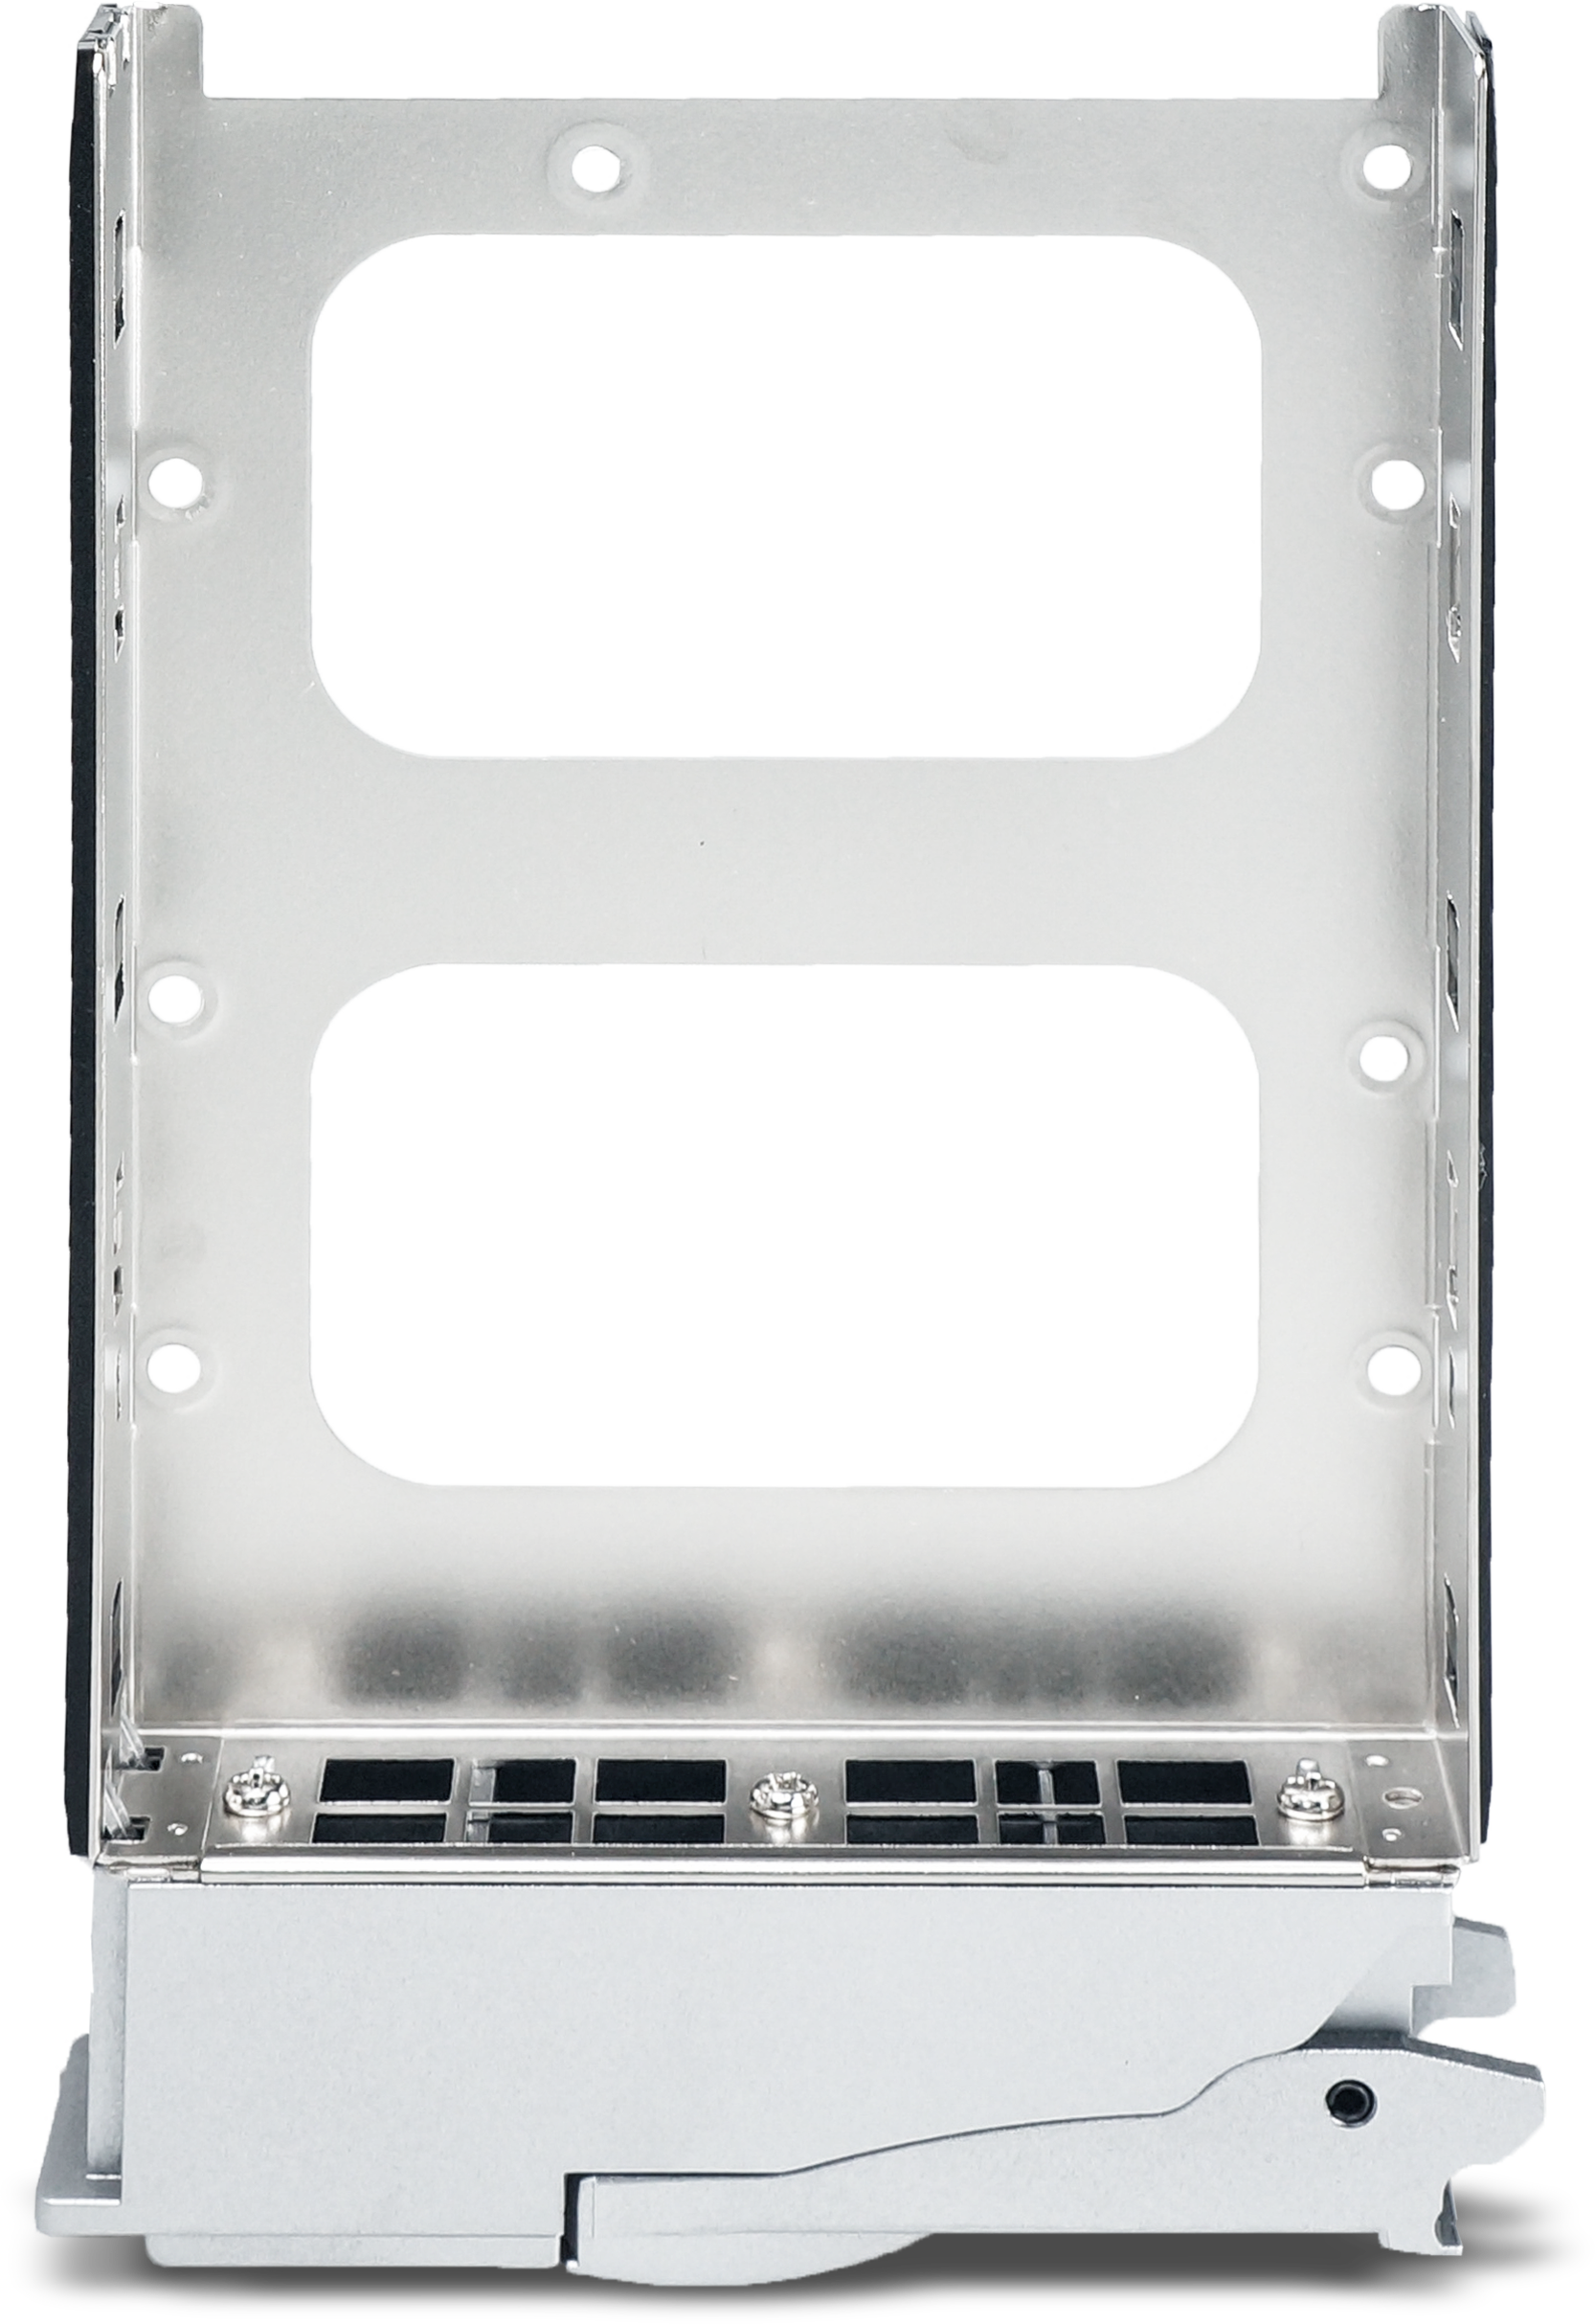 disk tray for 2.5 and 3.5 inches SSD/HDD hard drives.